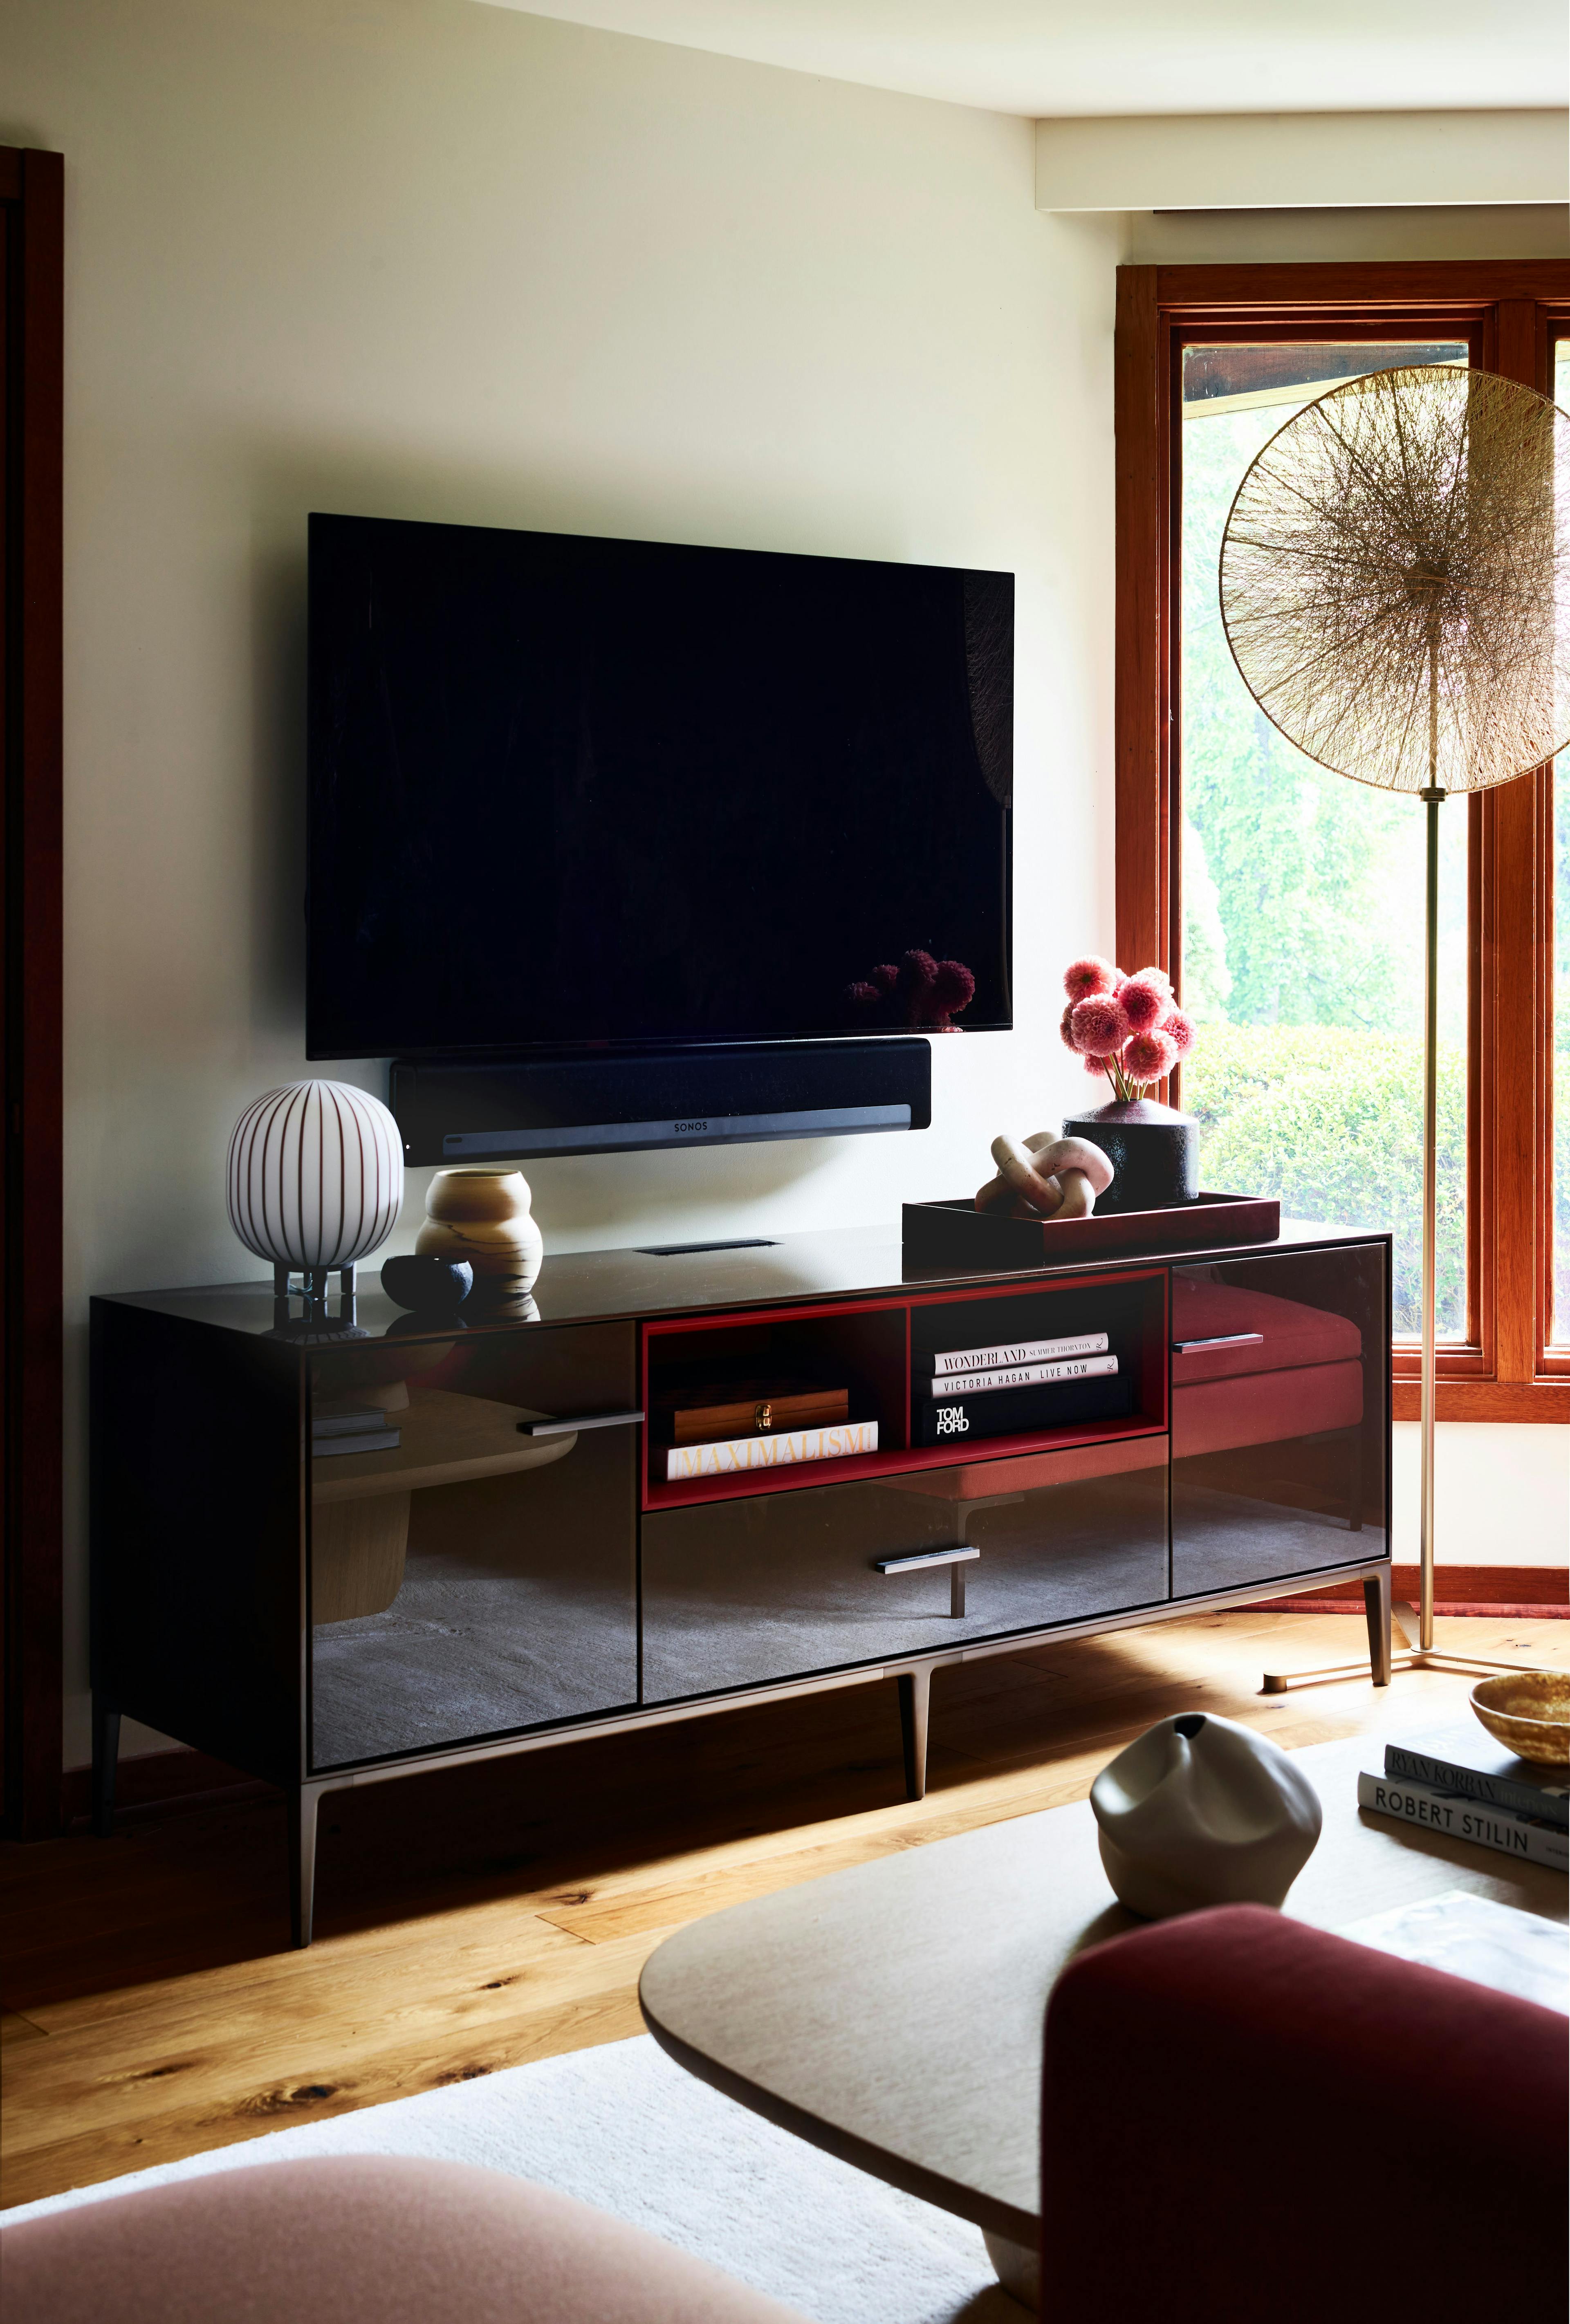 A modern entertainment center with a large flat screen TV in a room with a dynamic layout and stunning mountain views.